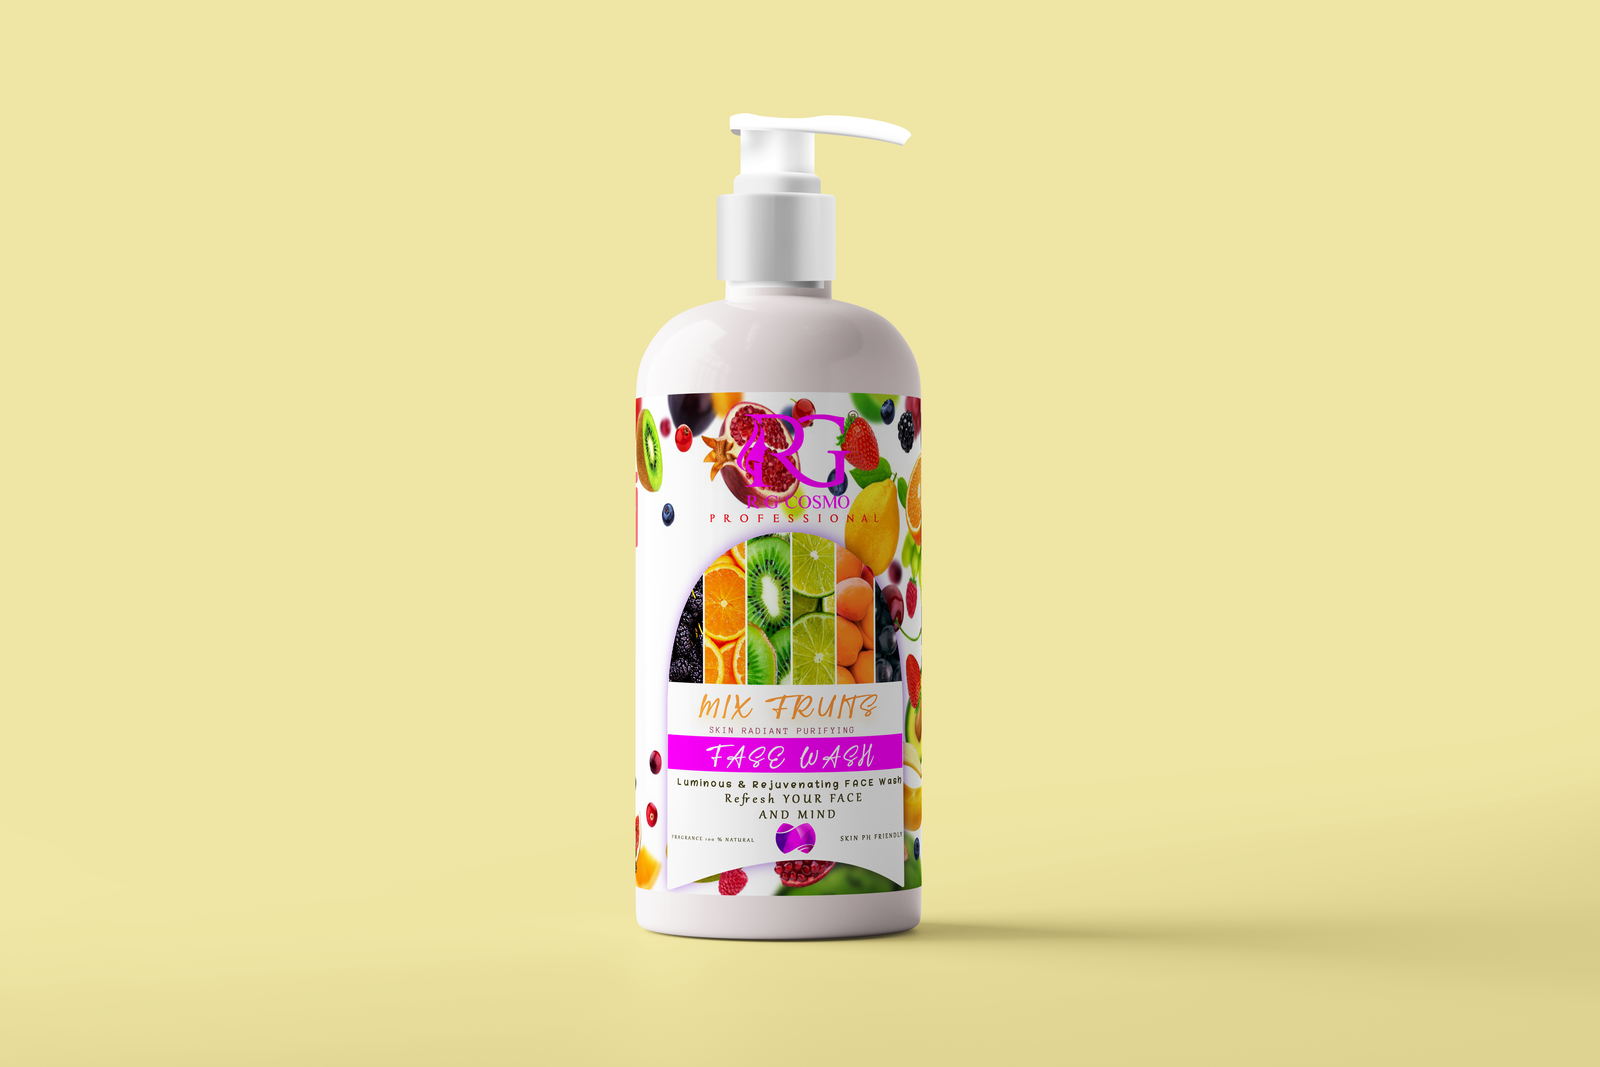 RG COSMO MIX FRUITS GLOW FACE WASH 500ML